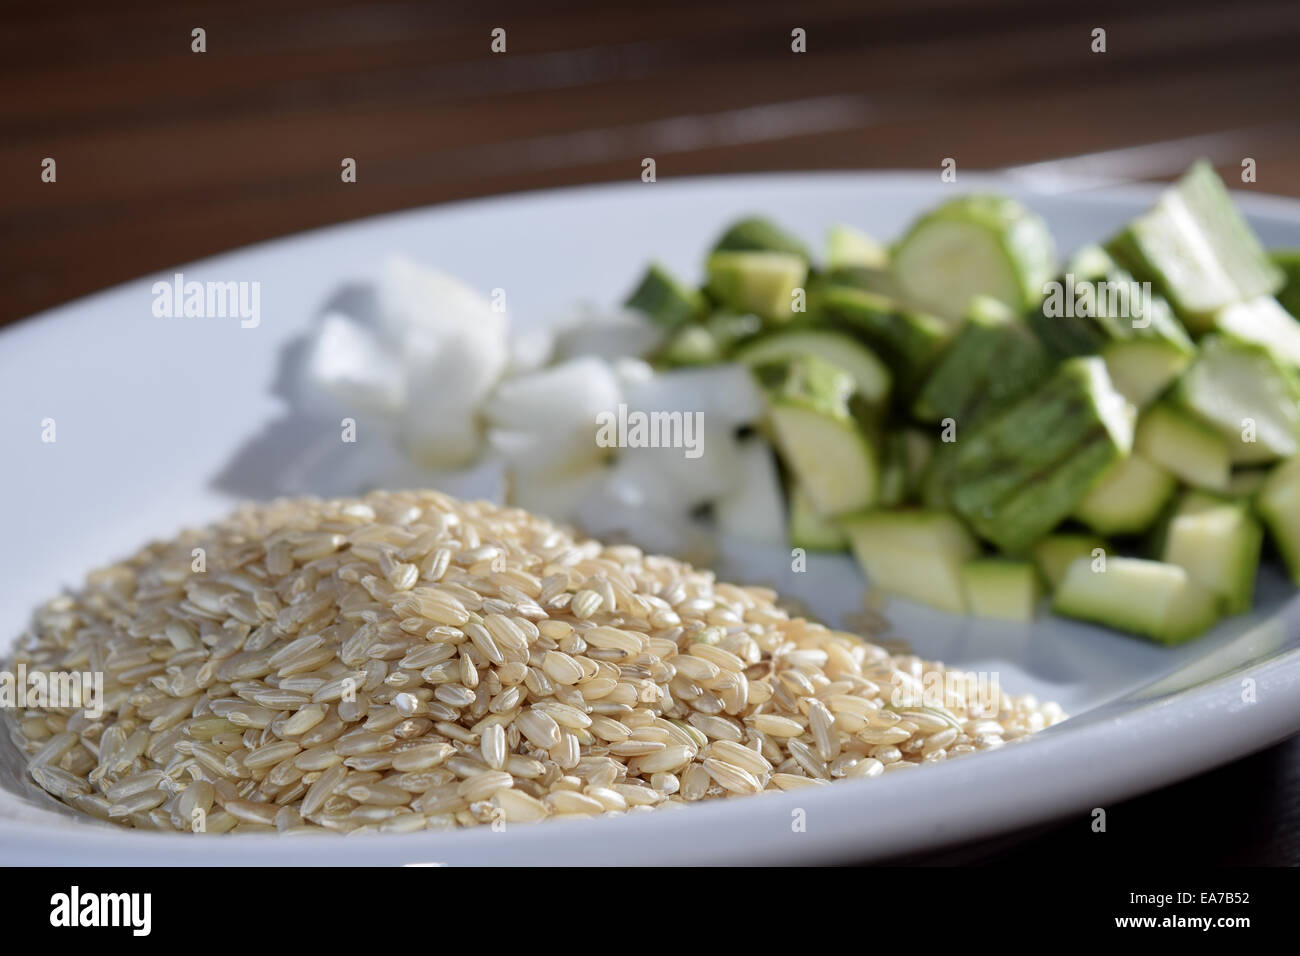 barley and zucchini for a healthy nutrition Stock Photo